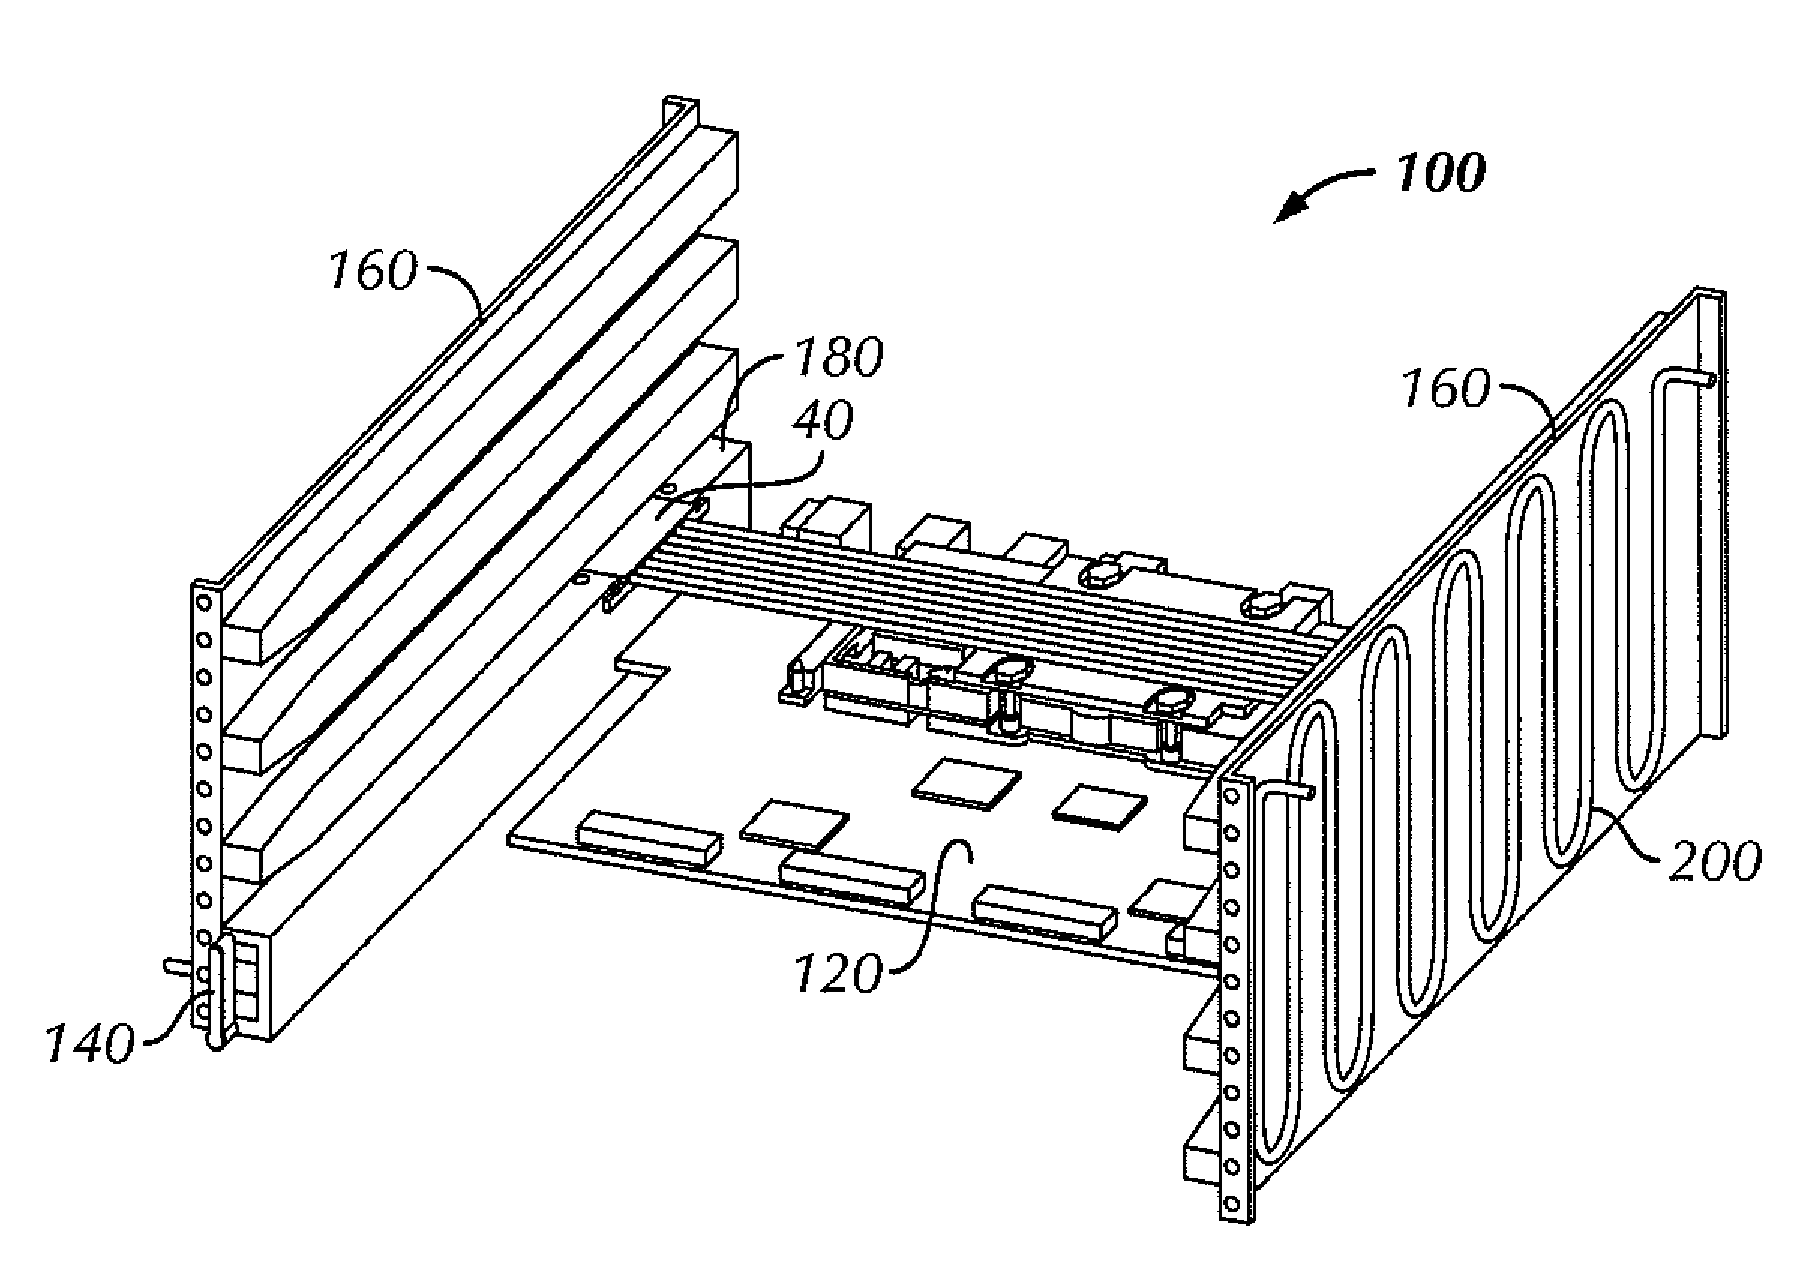 Thermal transfer technique using heat pipes with integral rack rails